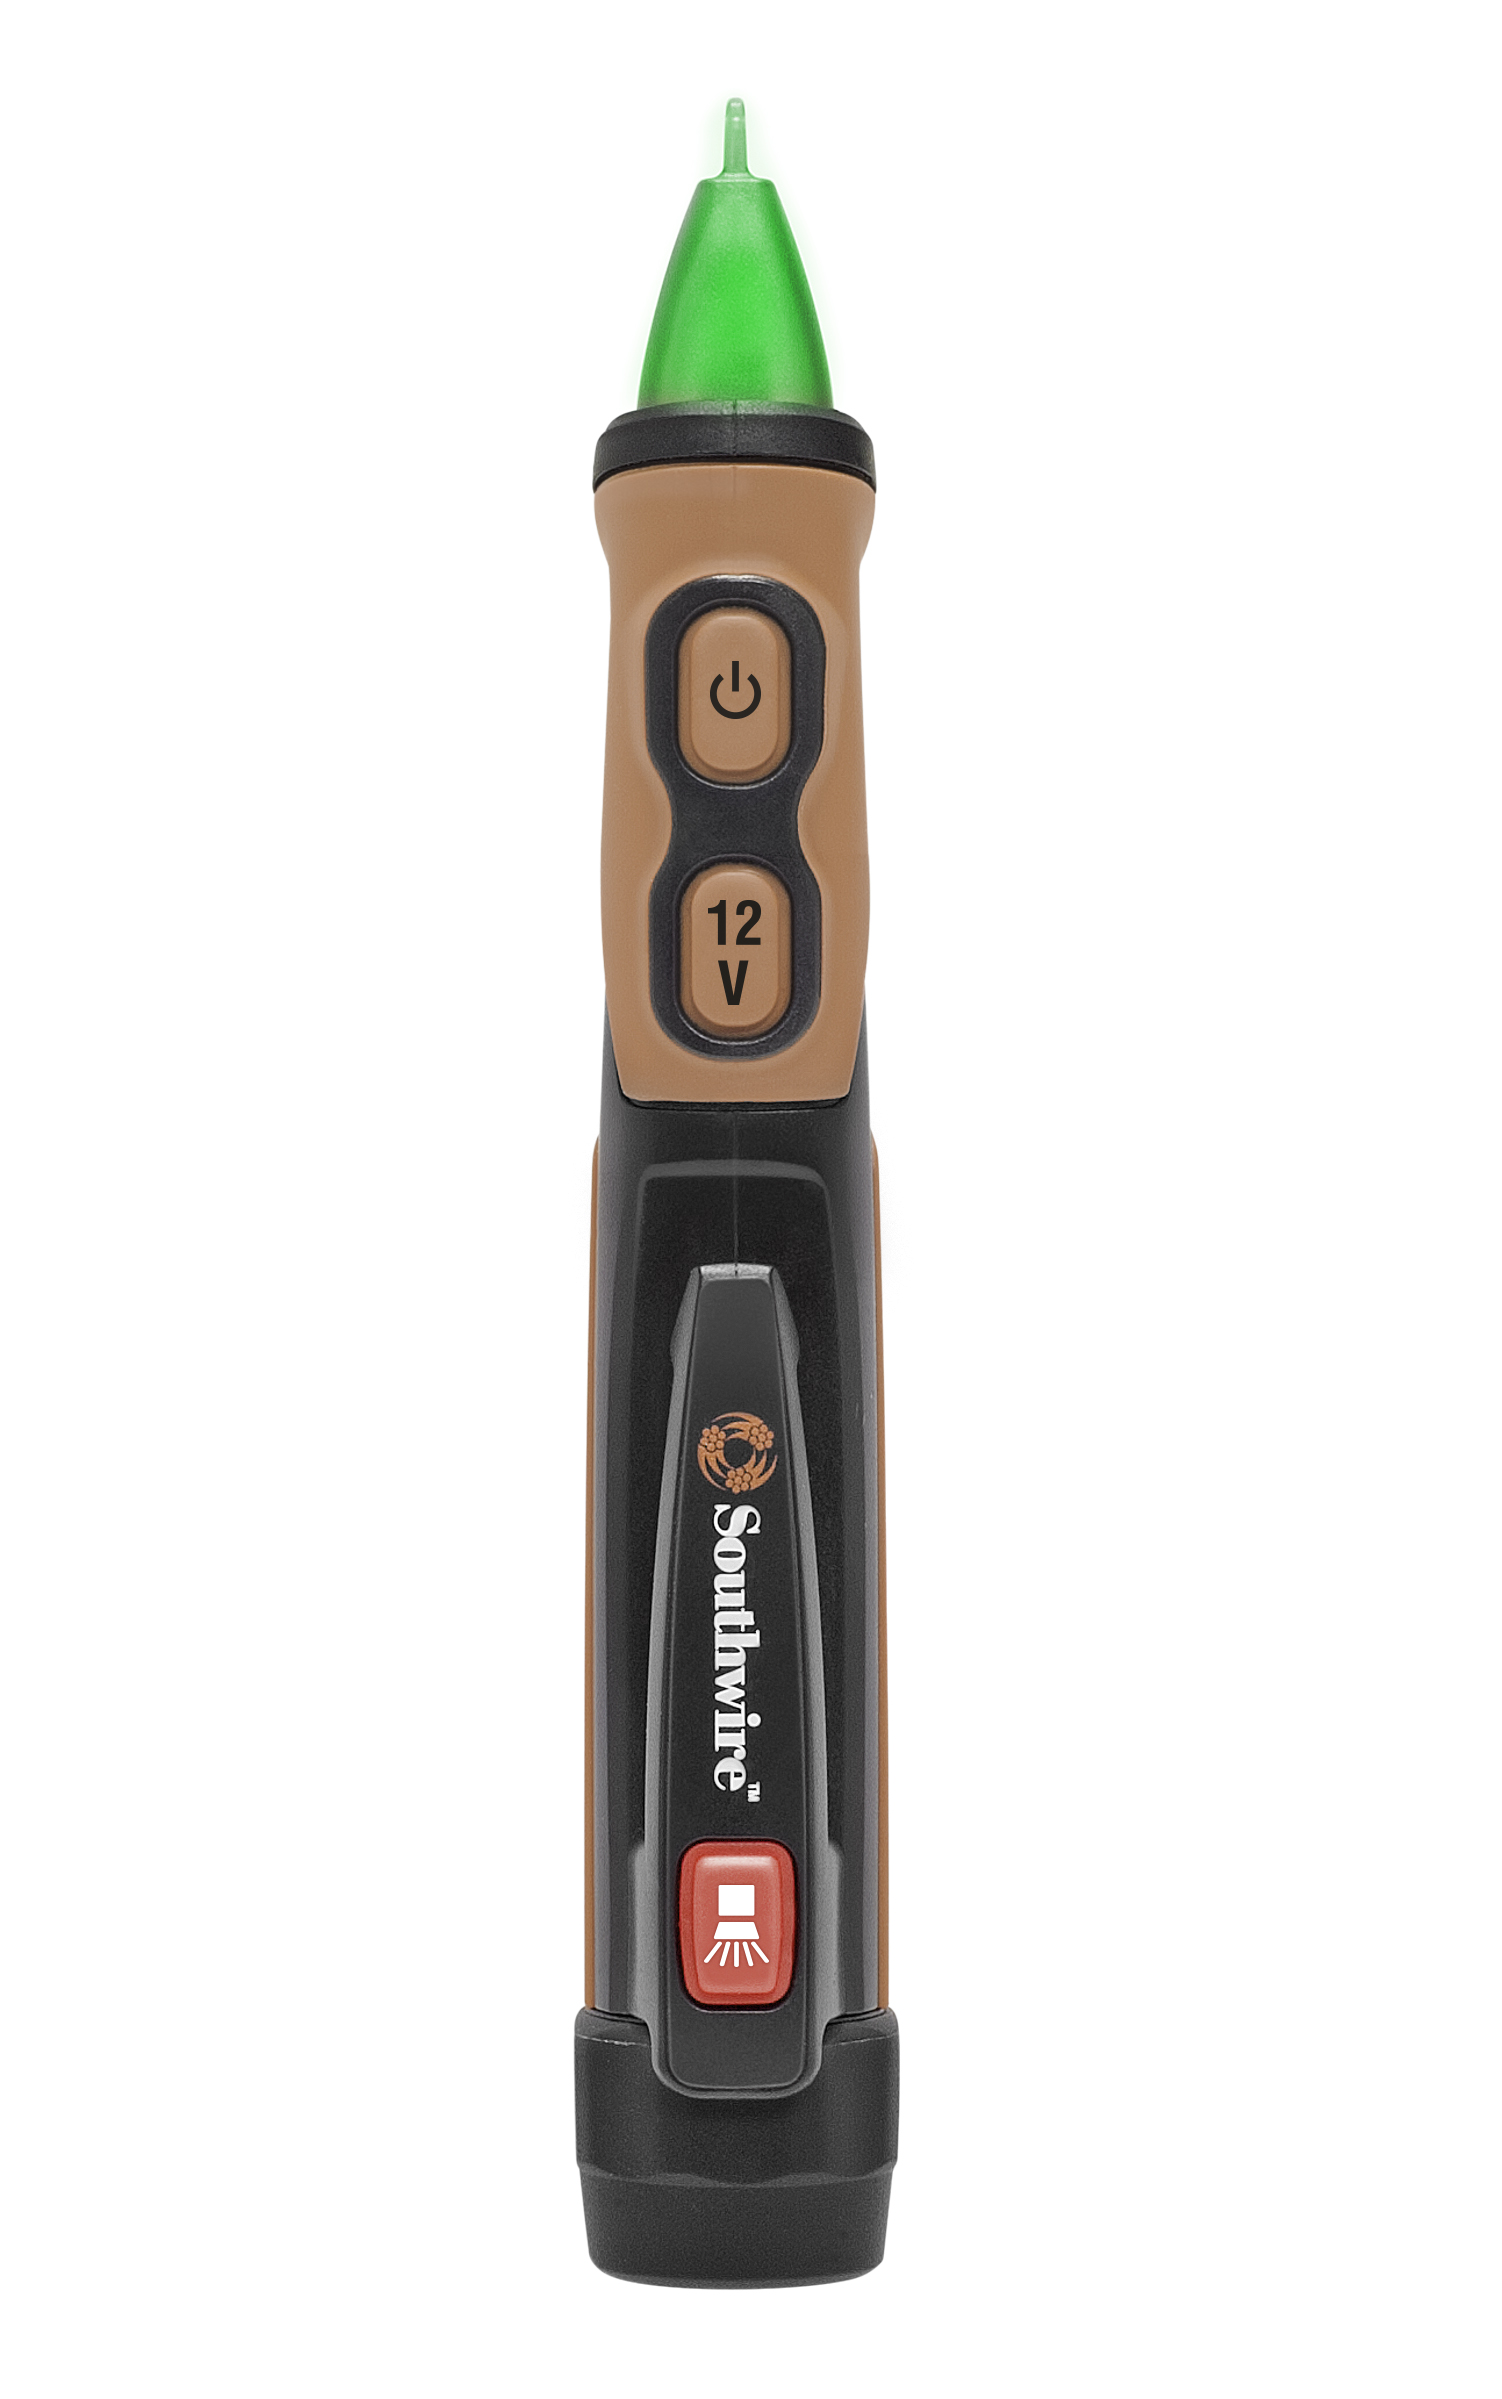 This non-contact AC voltage detector makes it even easier to check for live voltage on outlets, wiring, circuit breakers, lighting fixtures and switches. It comes with a standard on/off switch and rear facing flashlight. The 40150N has dual sensitivity which allows detection of voltage in low voltage circuits down to 24V AC as well as higher voltage up to 600V AC.